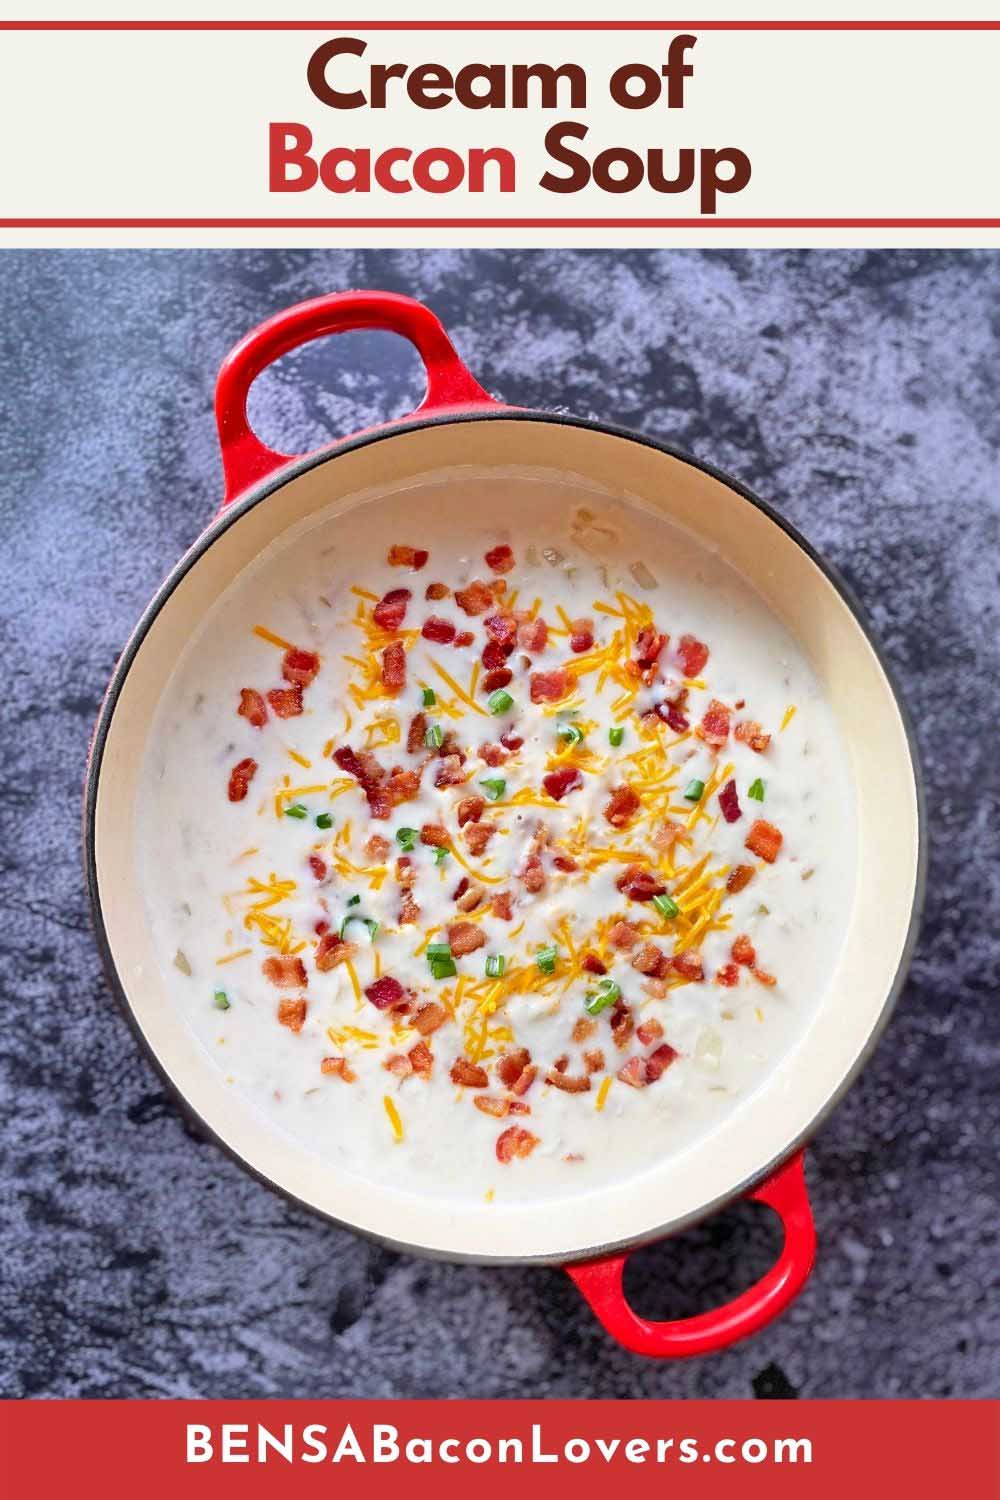 A pot of Cream of Bacon Soup on a mottled concrete background